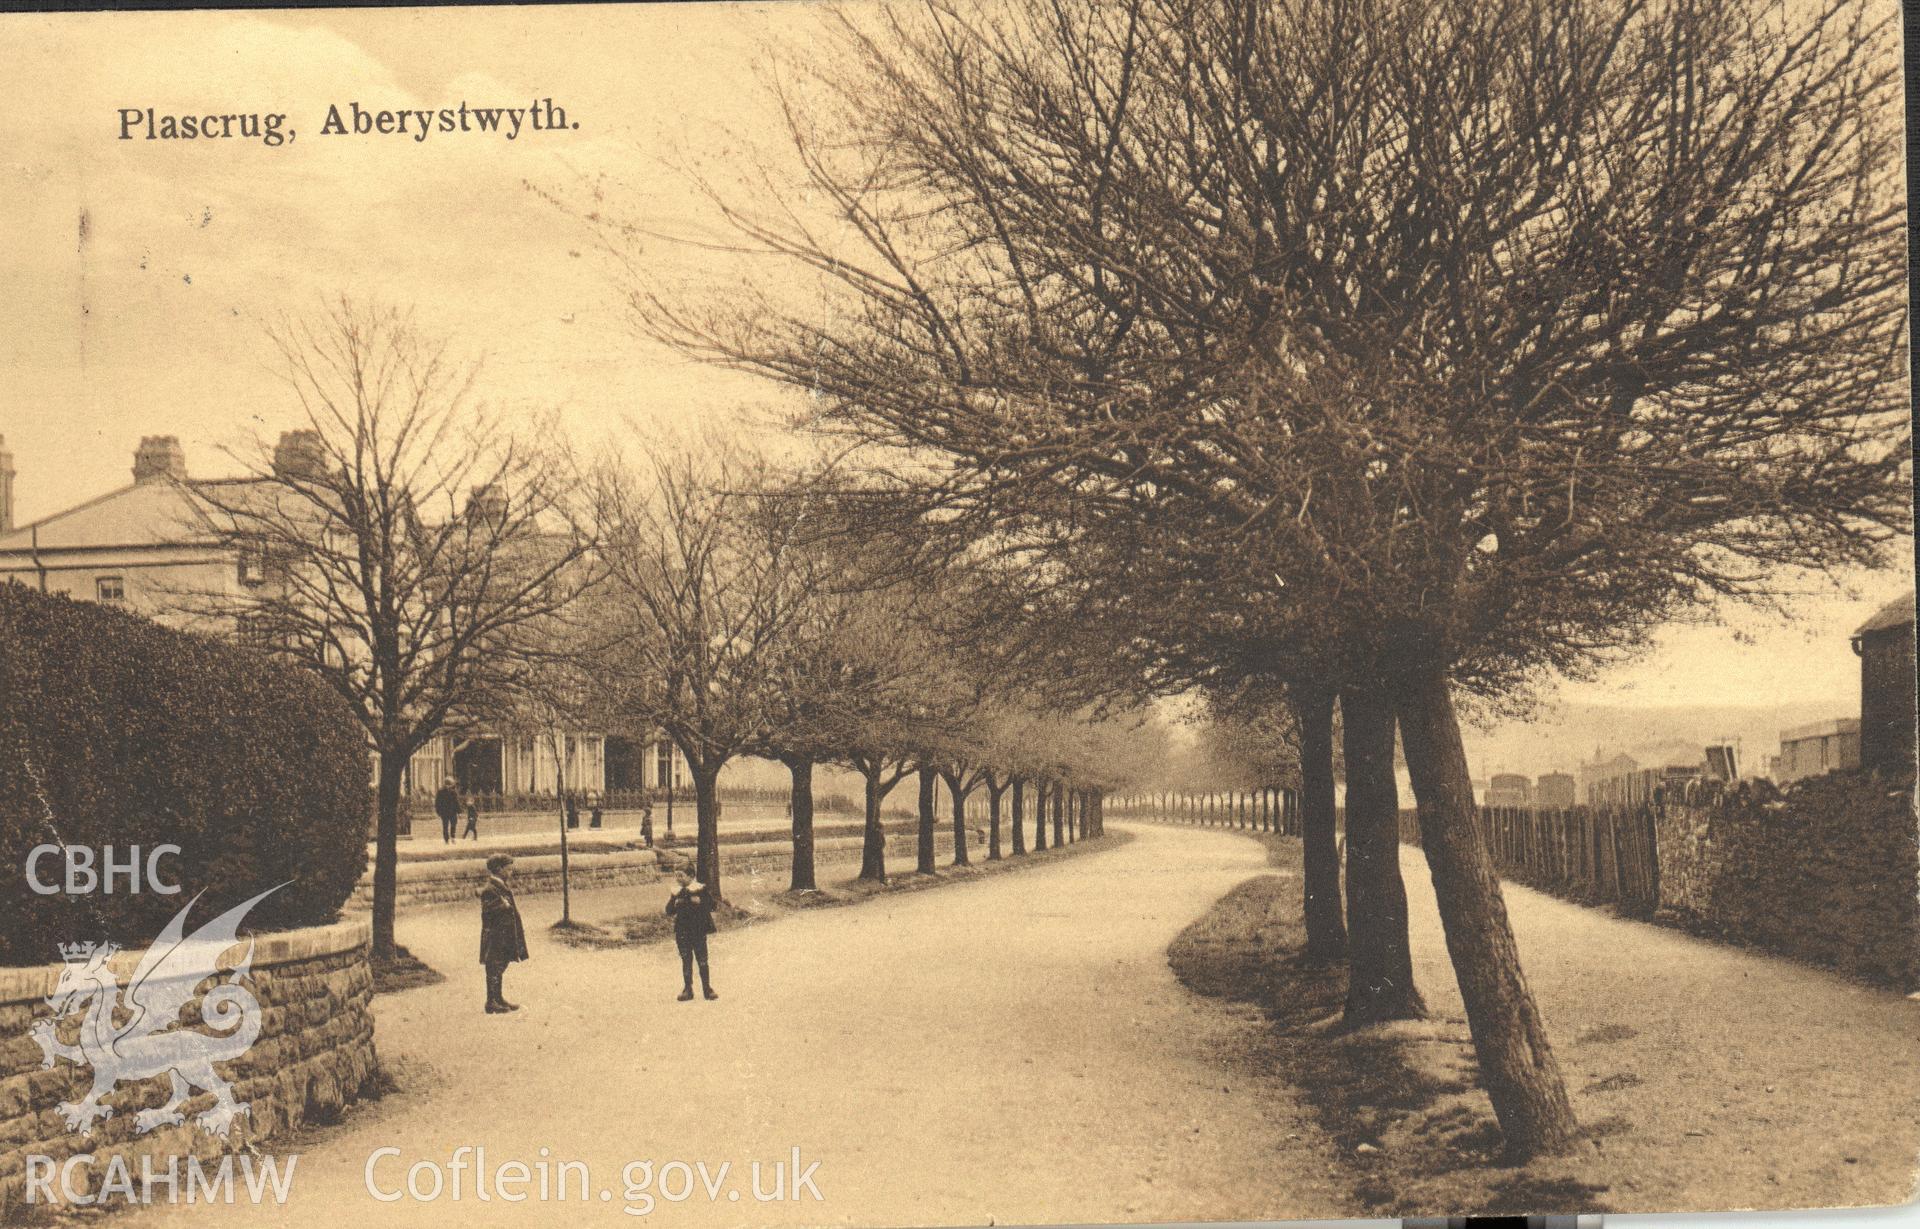 Digitised postcard image of Plascrug Avenue, Aberystwyth, Boots Chemists "Pelham" Series. Produced by Parks and Gardens Data Services, from an original item in the Peter Davis Collection at Parks and Gardens UK. We hold only web-resolution images of this collection, suitable for viewing on screen and for research purposes only. We do not hold the original images, or publication quality scans.